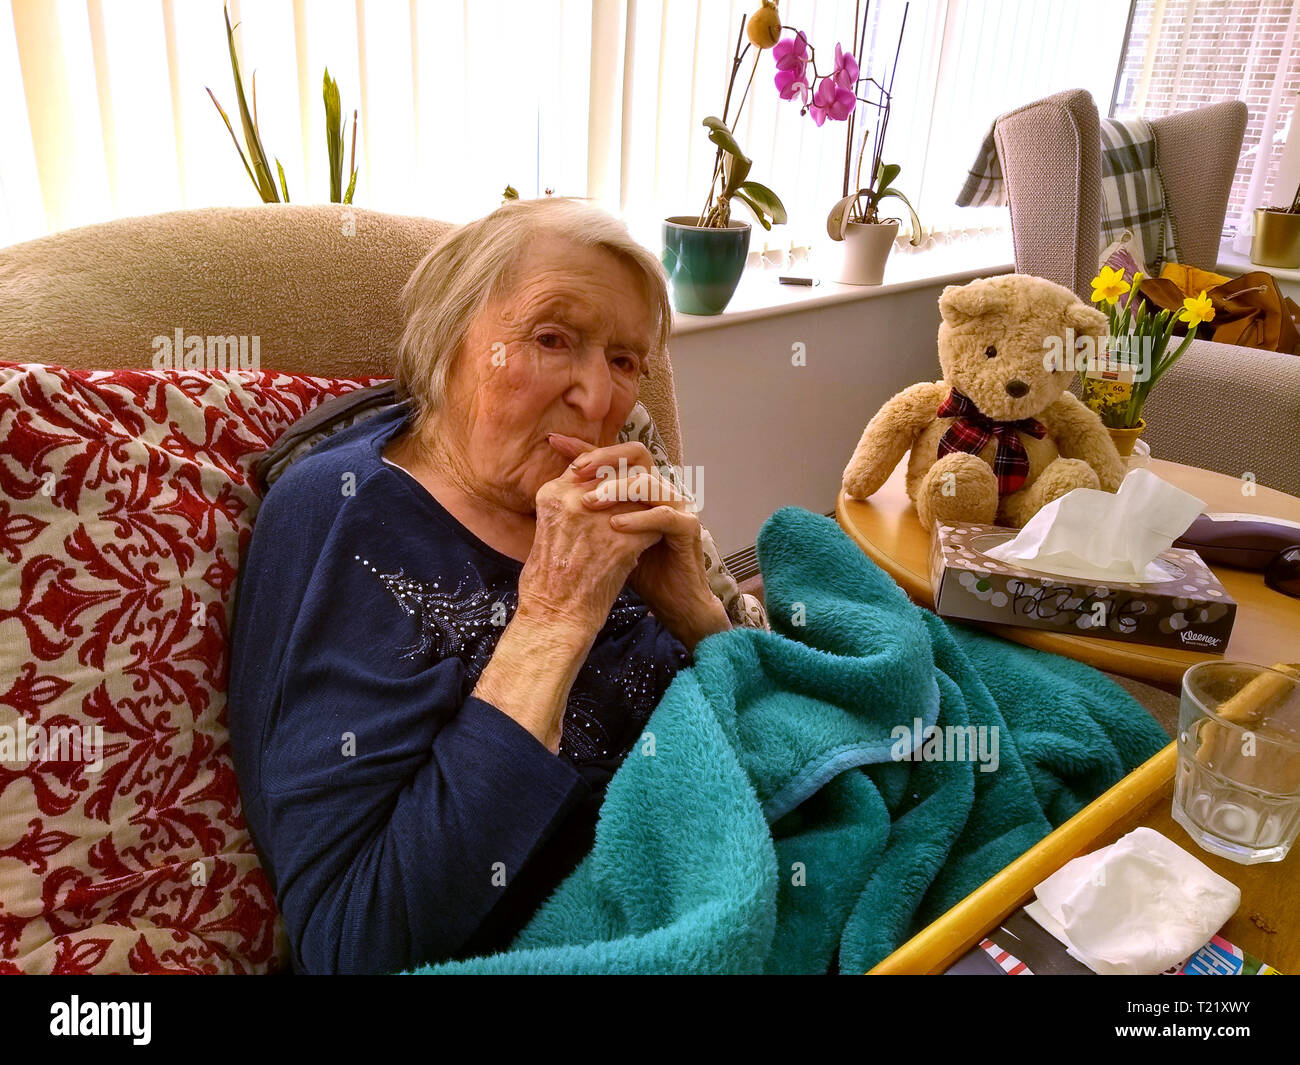 Old lady aged 104 years old deep in thought in a care home Britain, Uk centenarian 100 years old year Stock Photo